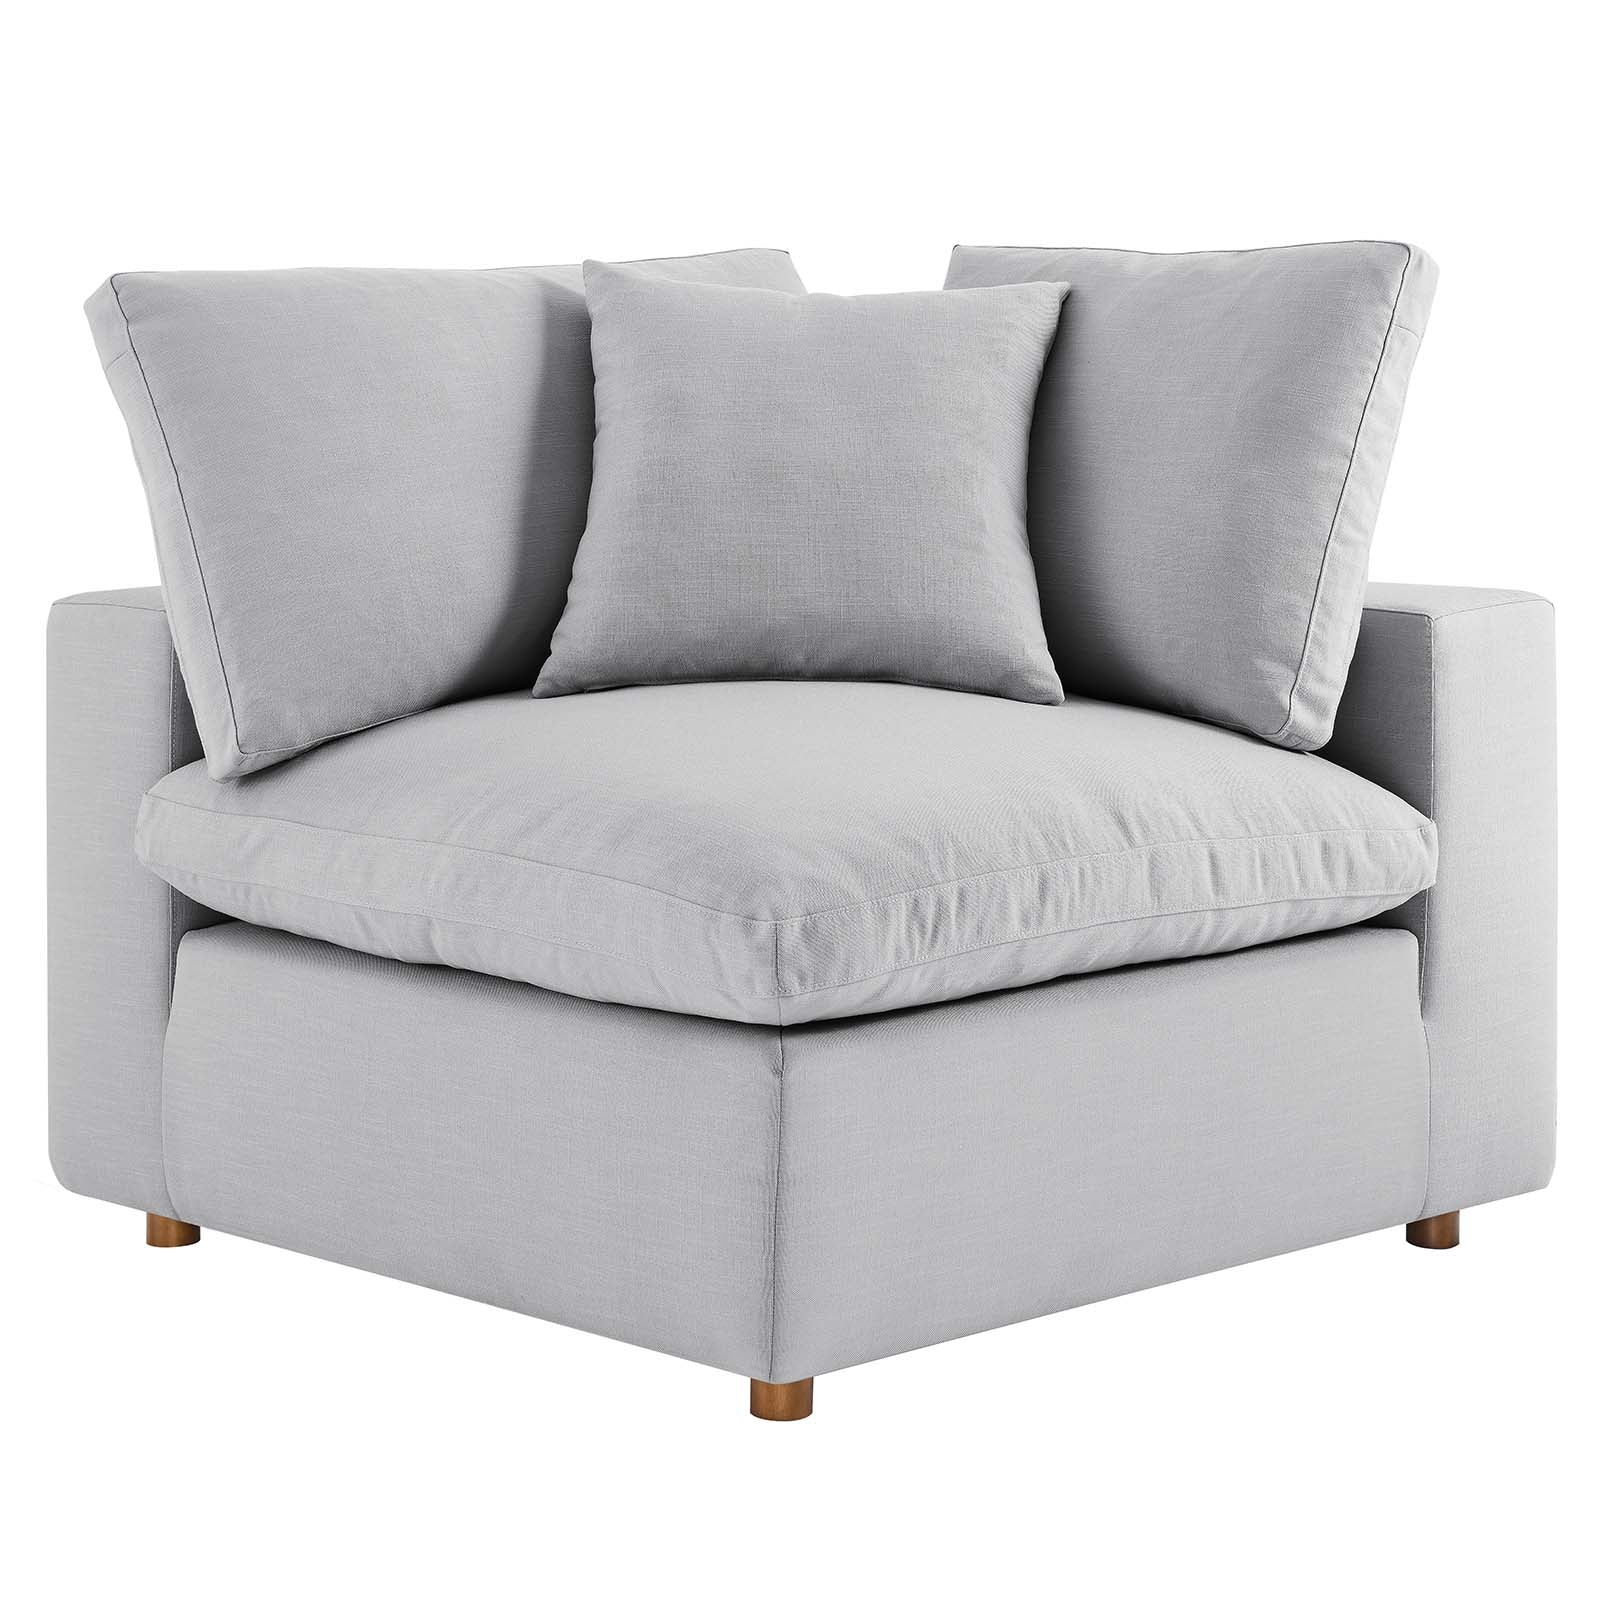 Modway Sectional Sofas - Commix Down Filled Overstuffed 3 Piece Sectional Sofa Set Light Gray